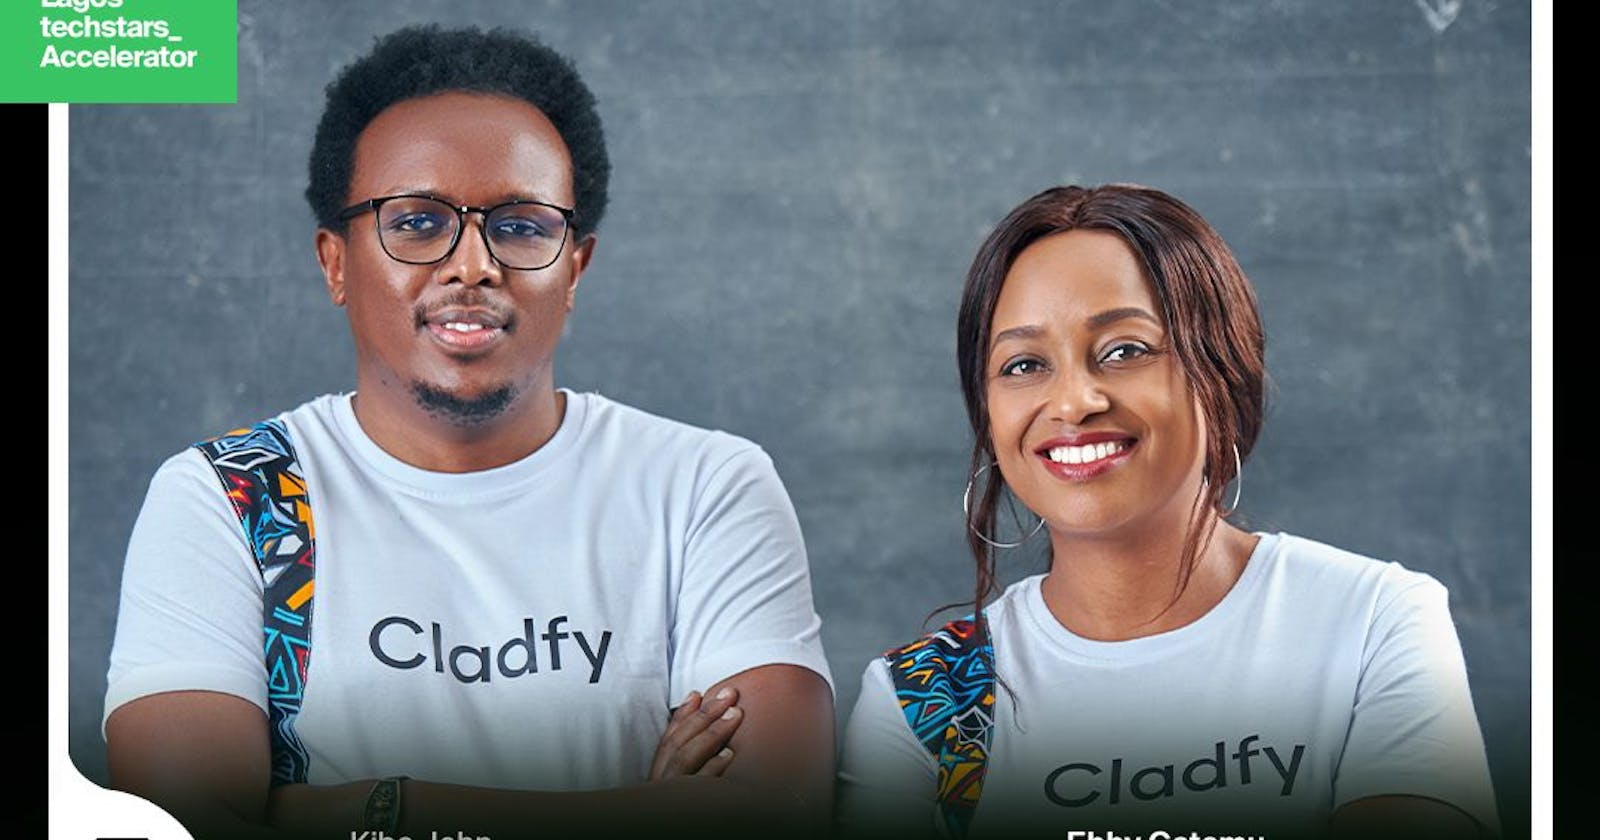 Cladfy is among the 12 startups selected for $120k ARM Labs Lagos Techstars accelerator programme